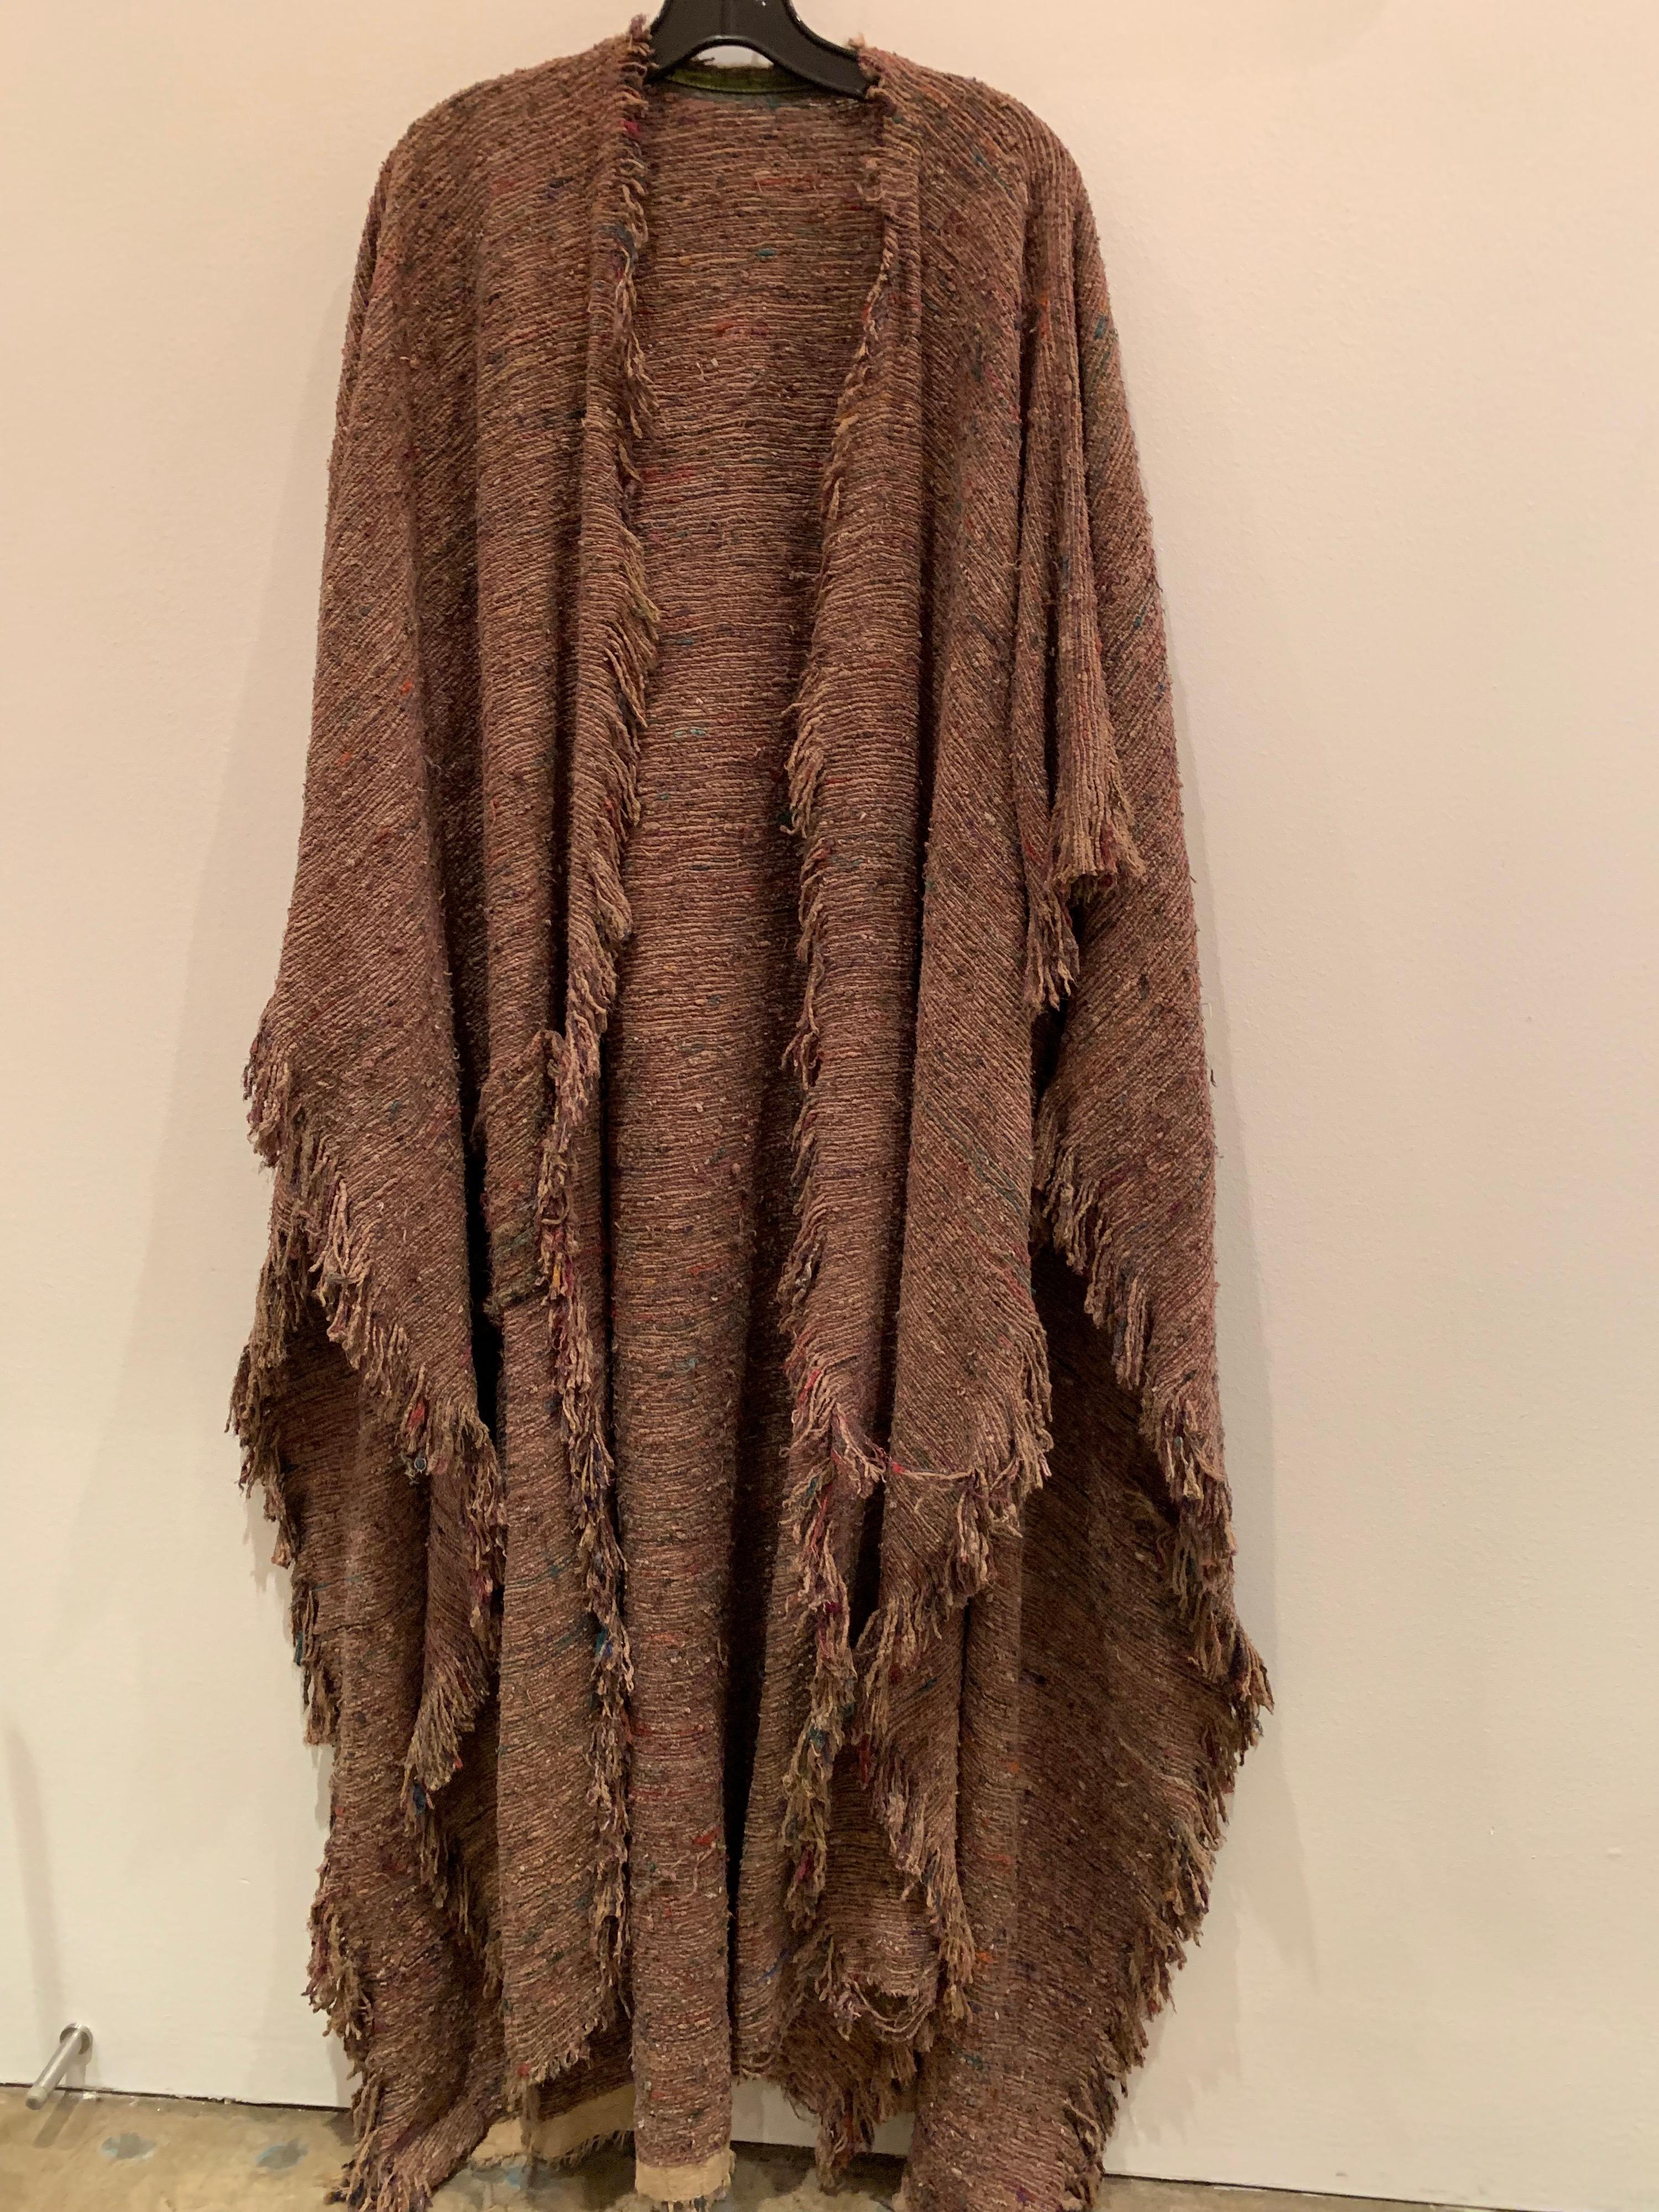 A beautiful, bohemian, cappuchino color hand-woven and over-dyed silk slubbed shawl or large wrap with fringed edges and various colors of fibers shot through the weave.  Earthy and gorgeous. 